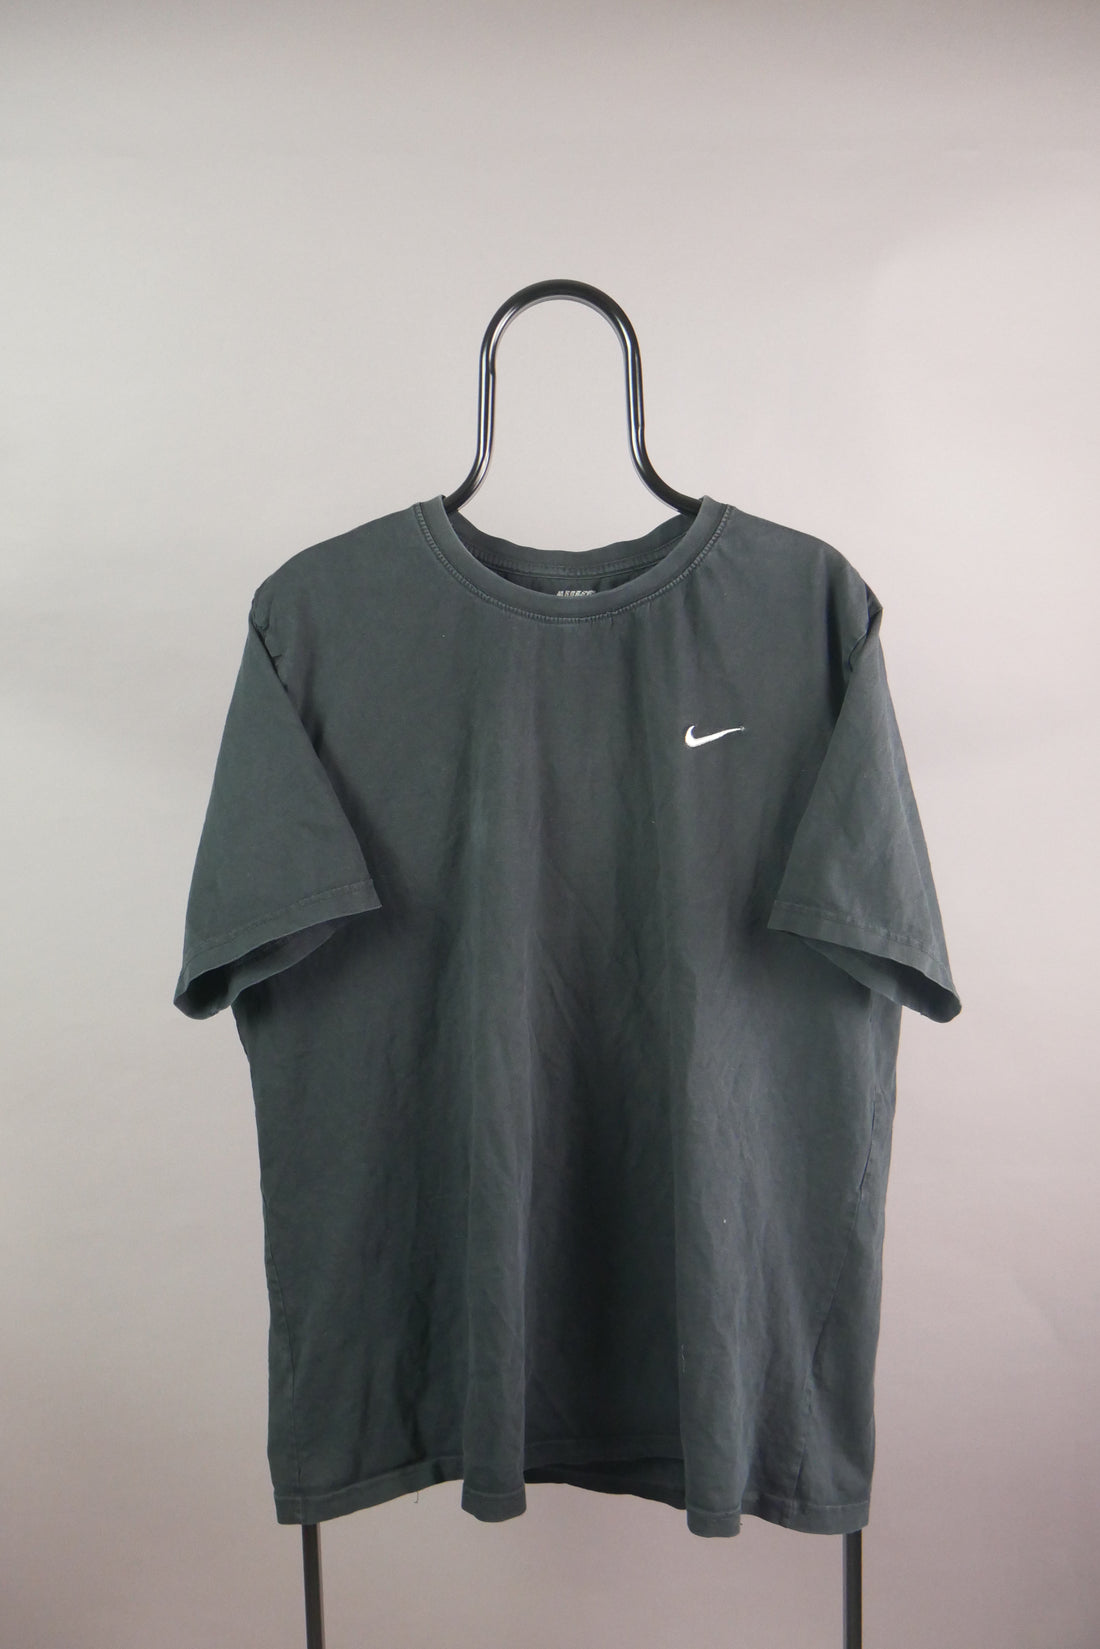 The Nike Embroidered Tick T-Shirt (2XL)